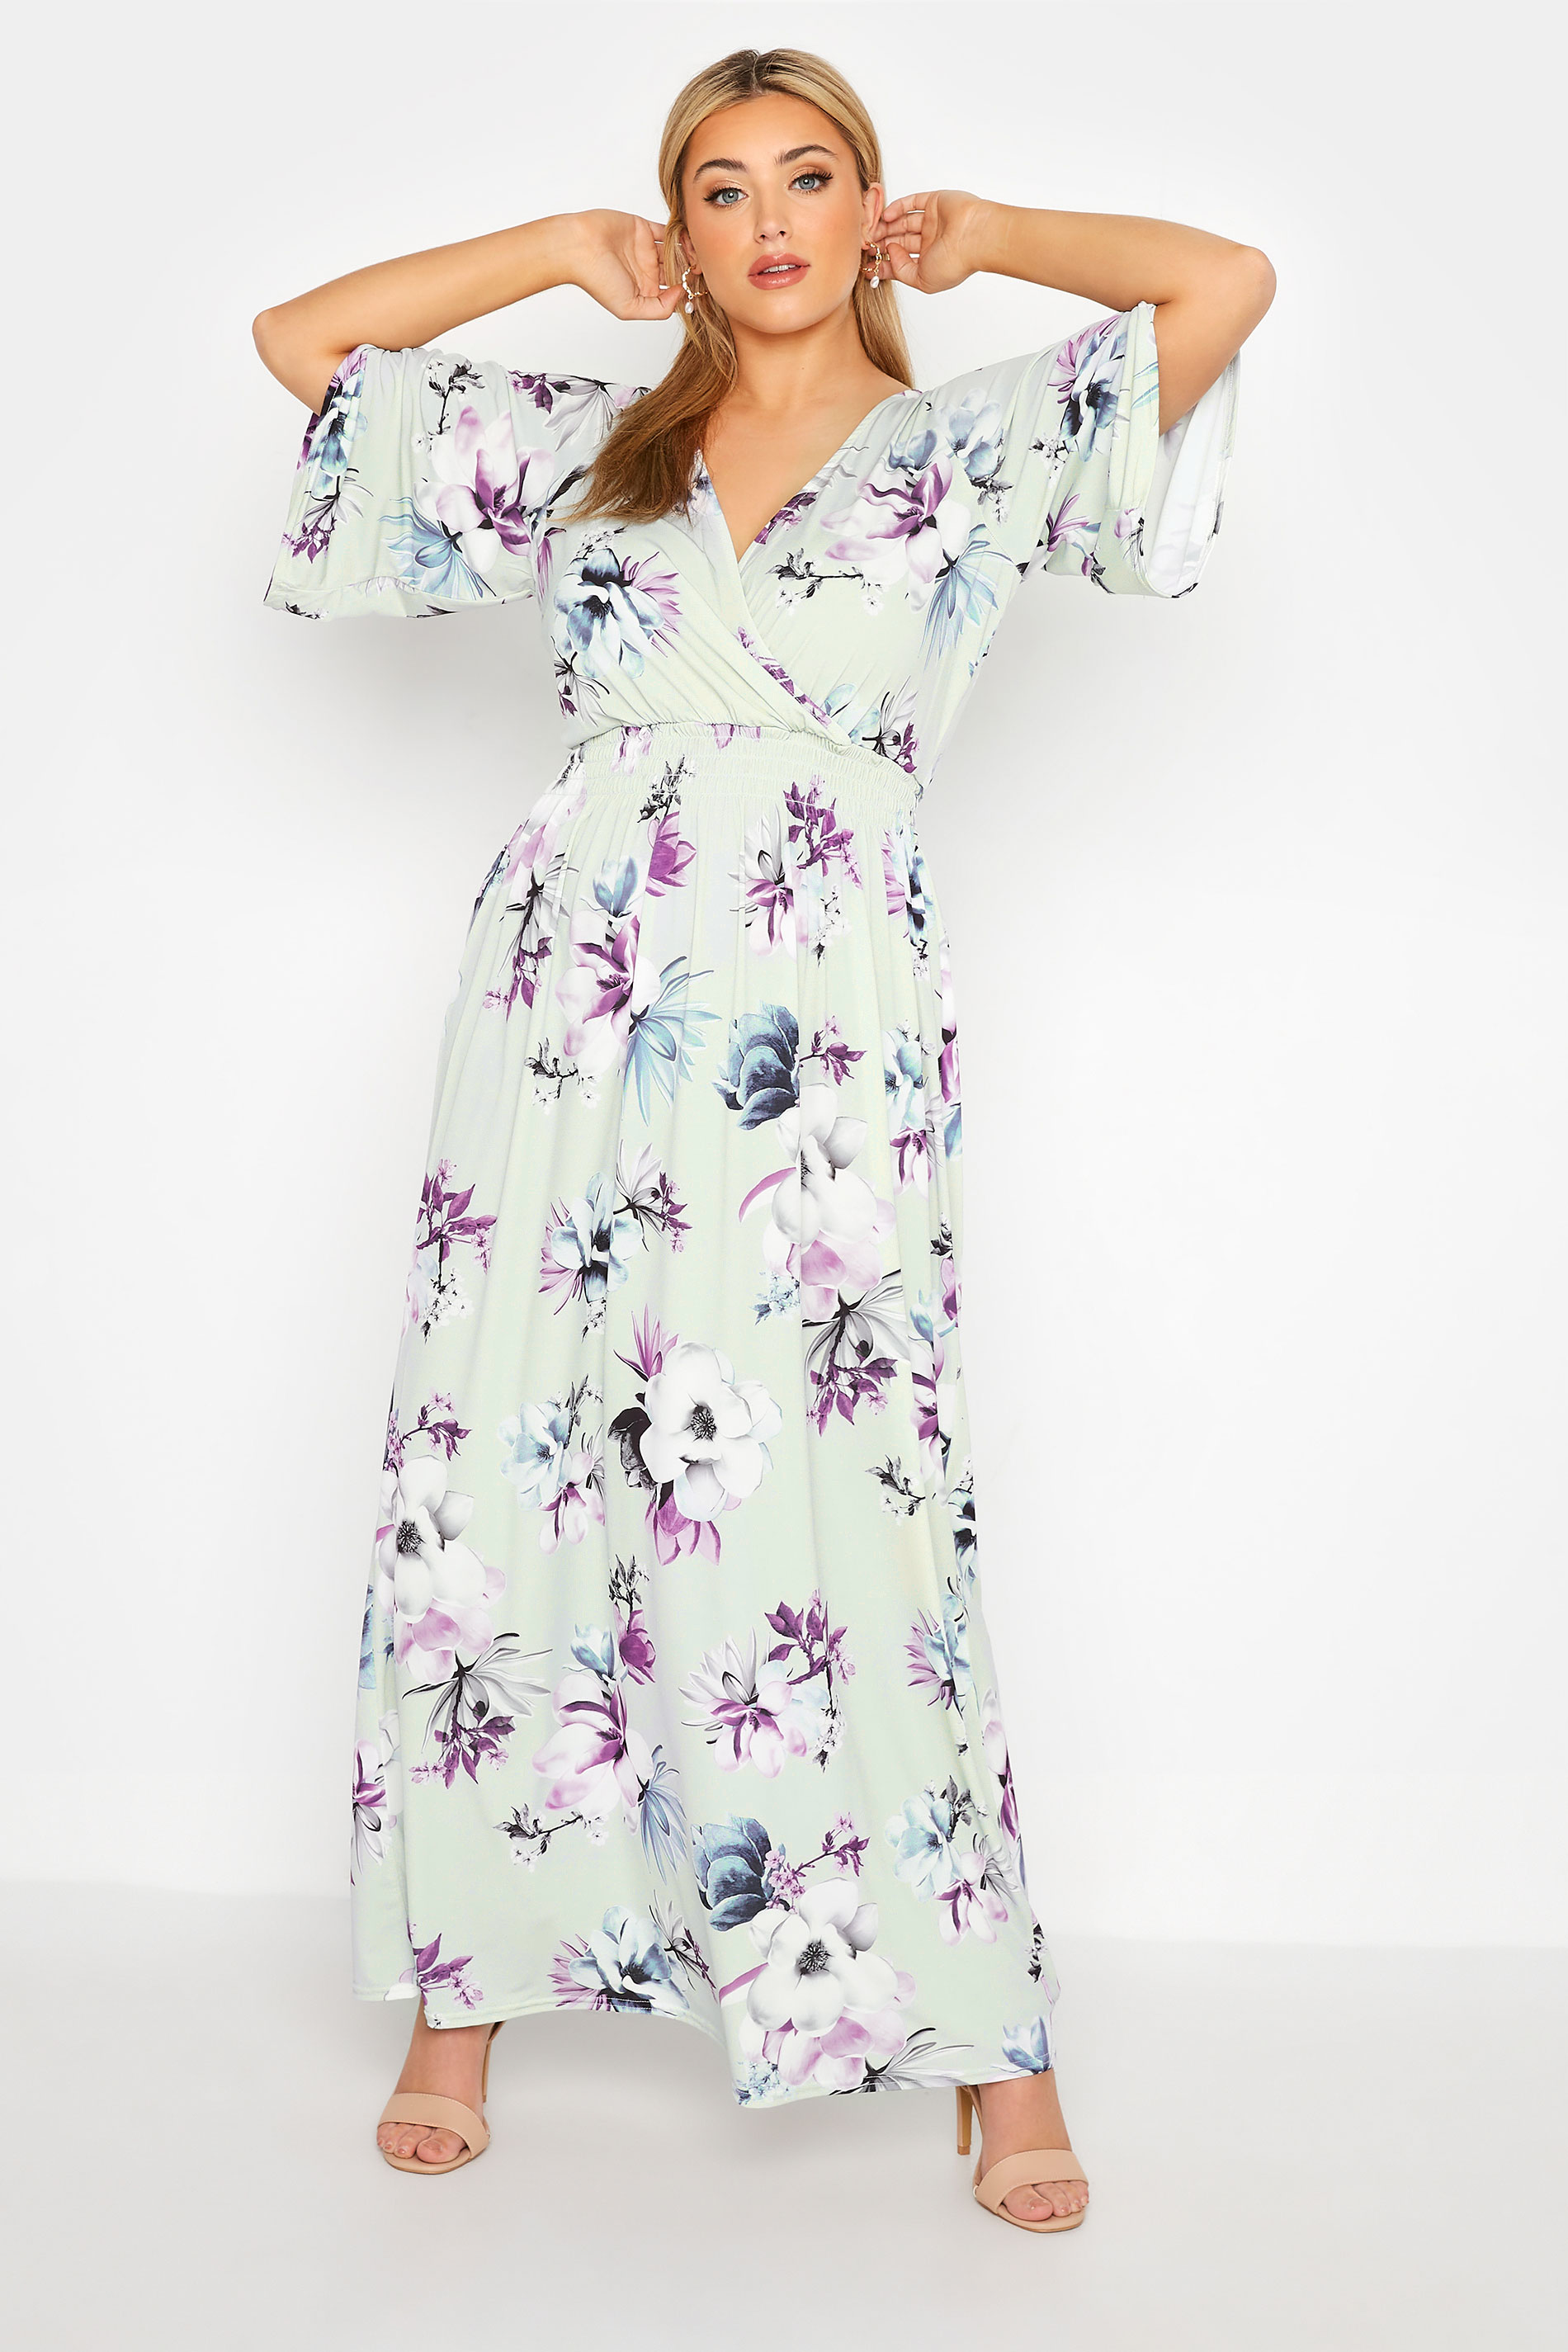 Robes Grande Taille Grande taille  Robes Longues | YOURS LONDON - Robe Cache-Coeur Floral Verte Pastel Maxi - HI29691